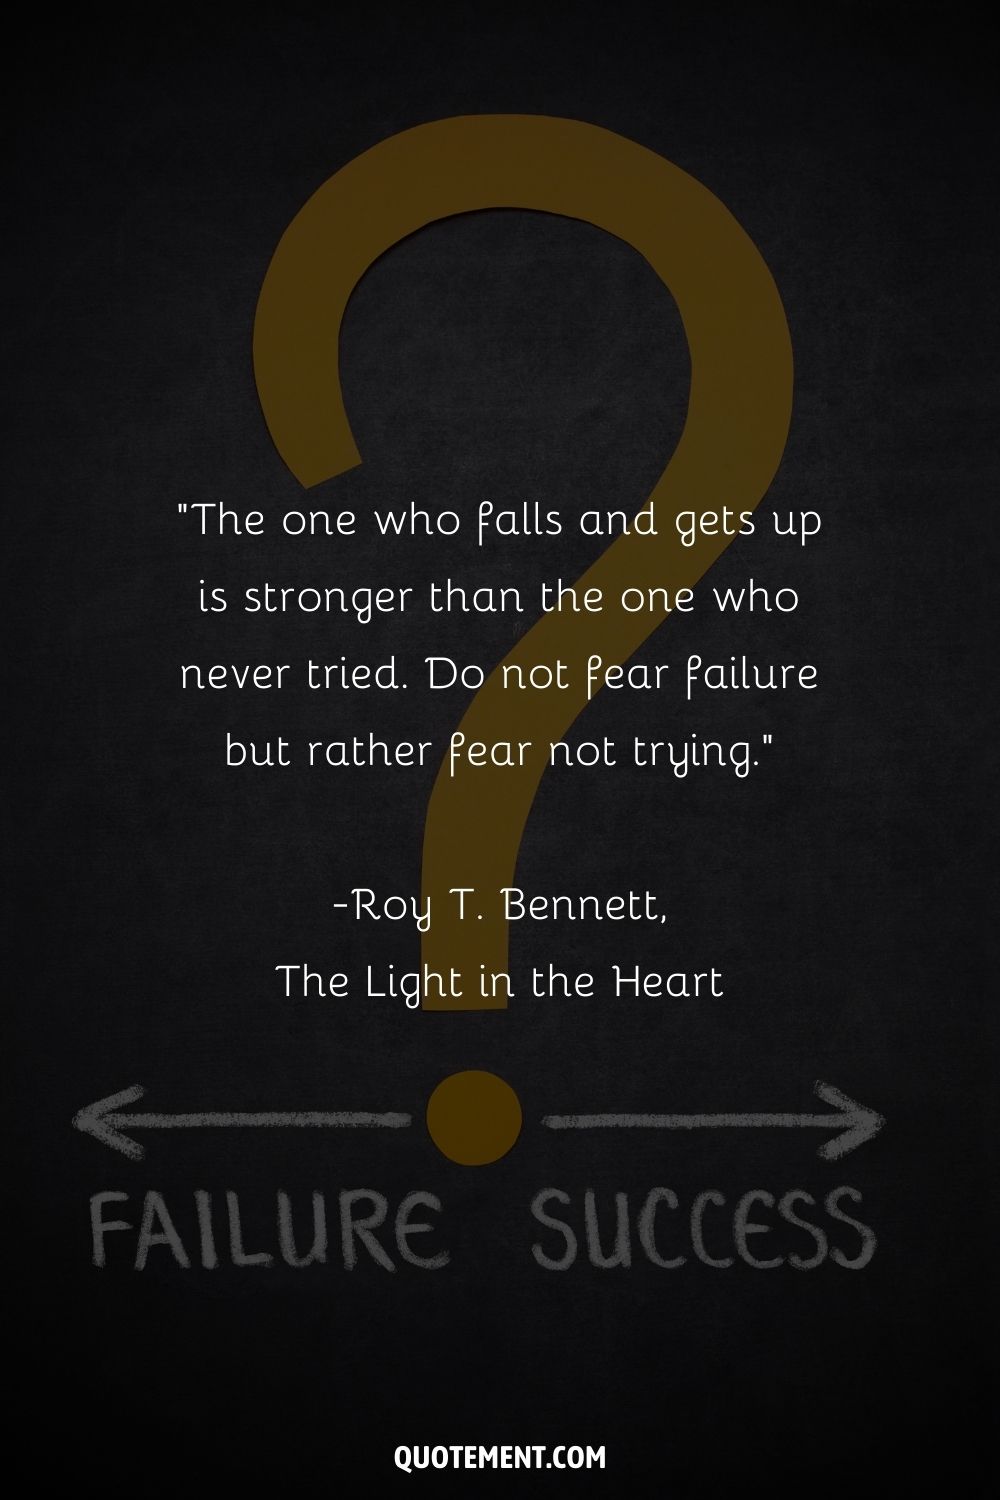 “The one who falls and gets up is stronger than the one who never tried. Do not fear failure but rather fear not trying.” ― Roy T. Bennett, The Light in the Heart